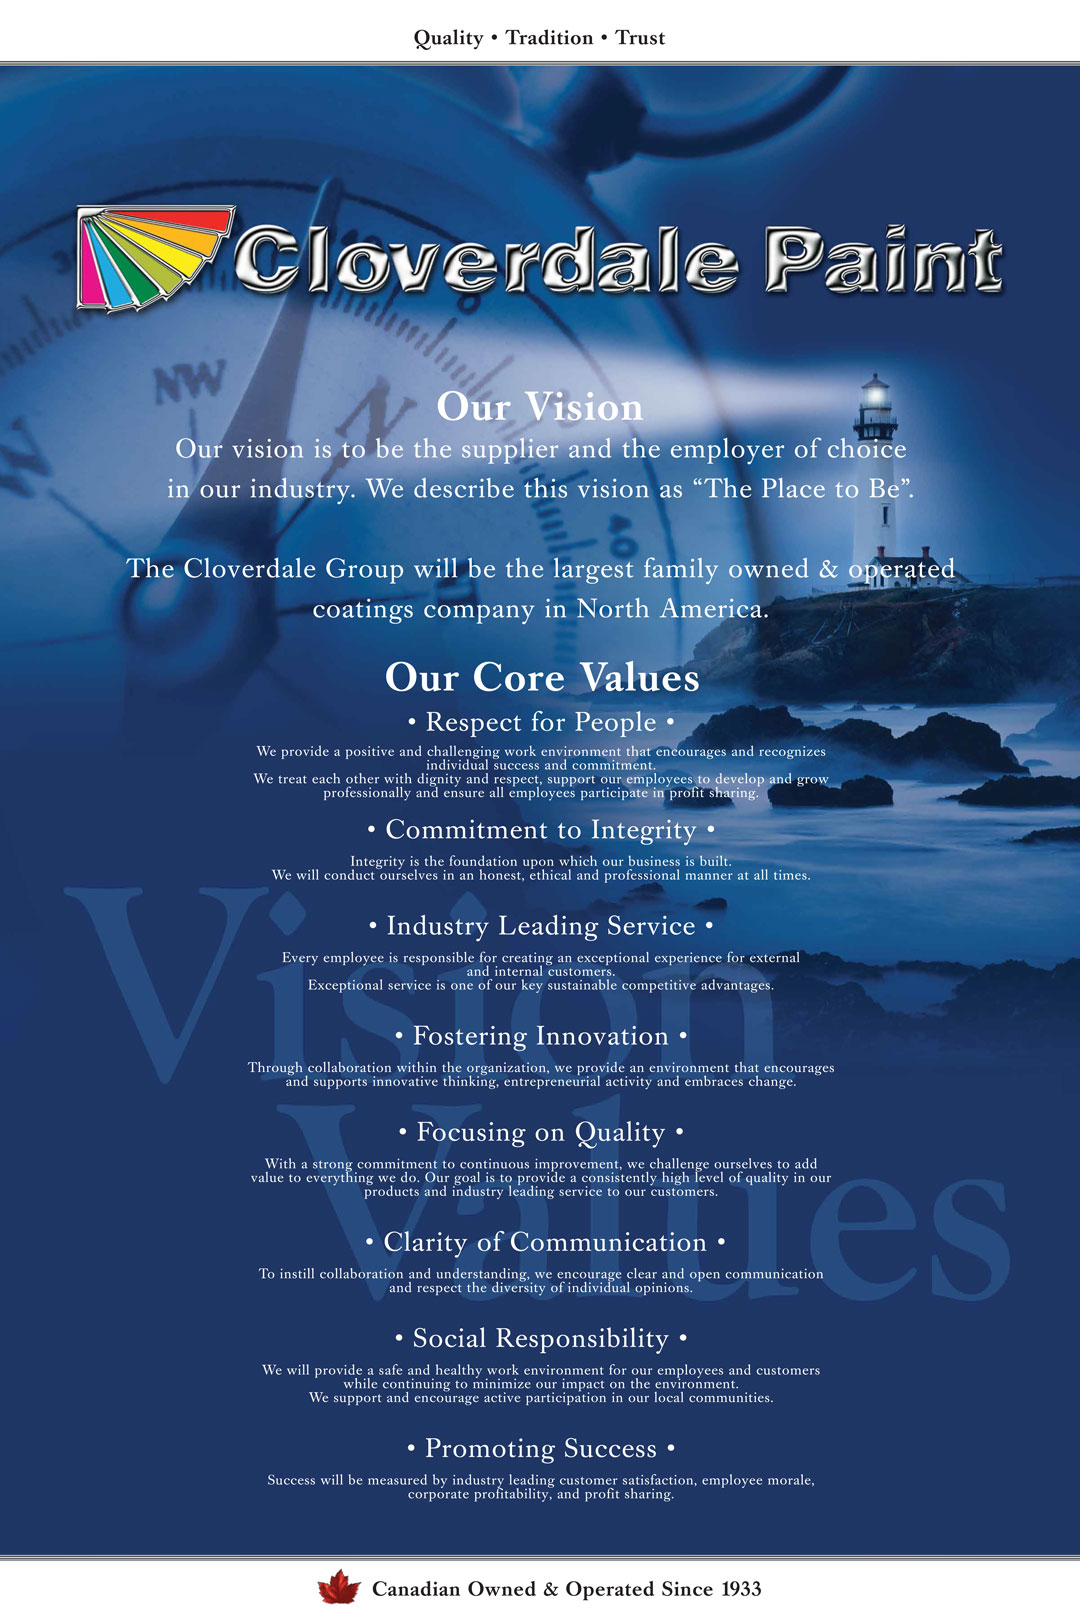 Our Vision & Our Core Values